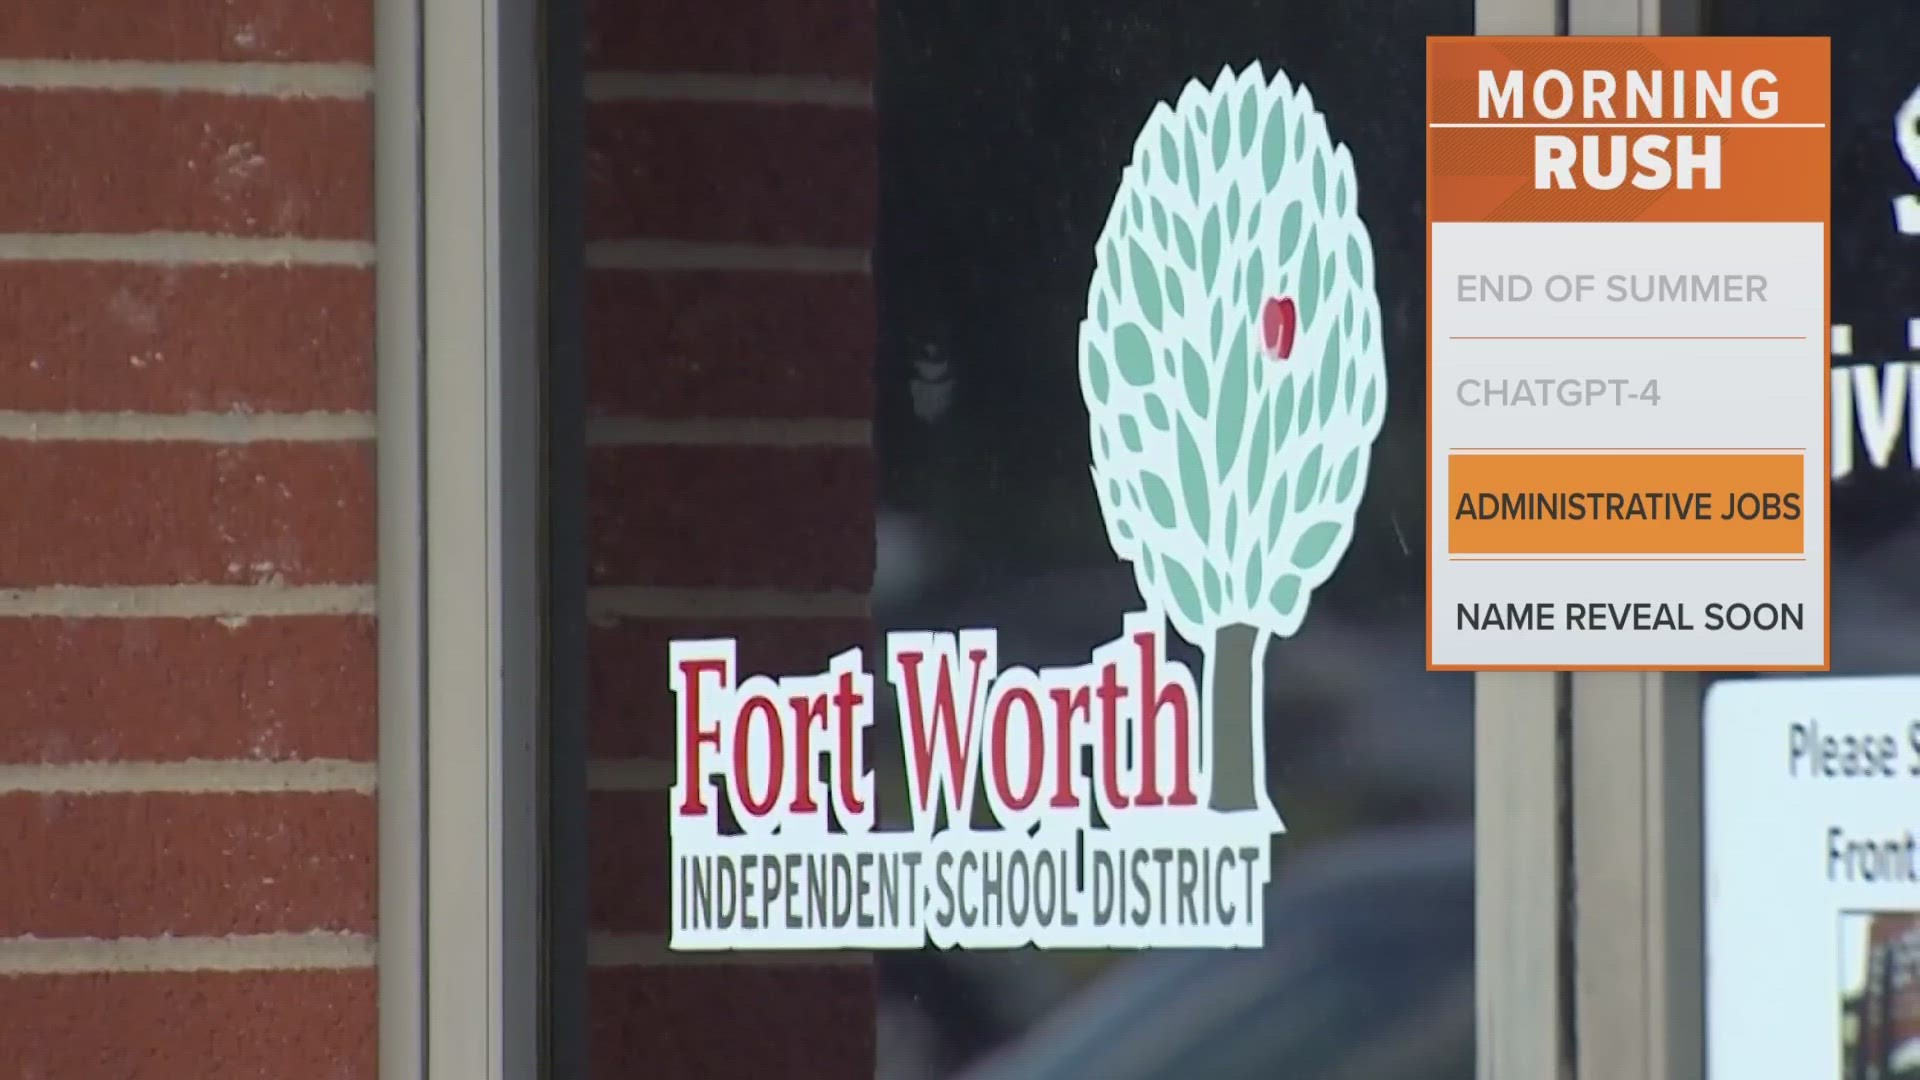 Members of the Fort Worth ISD school board approved a resolution that will cut top administrative positions in a push to achieve a “reduction in force.”